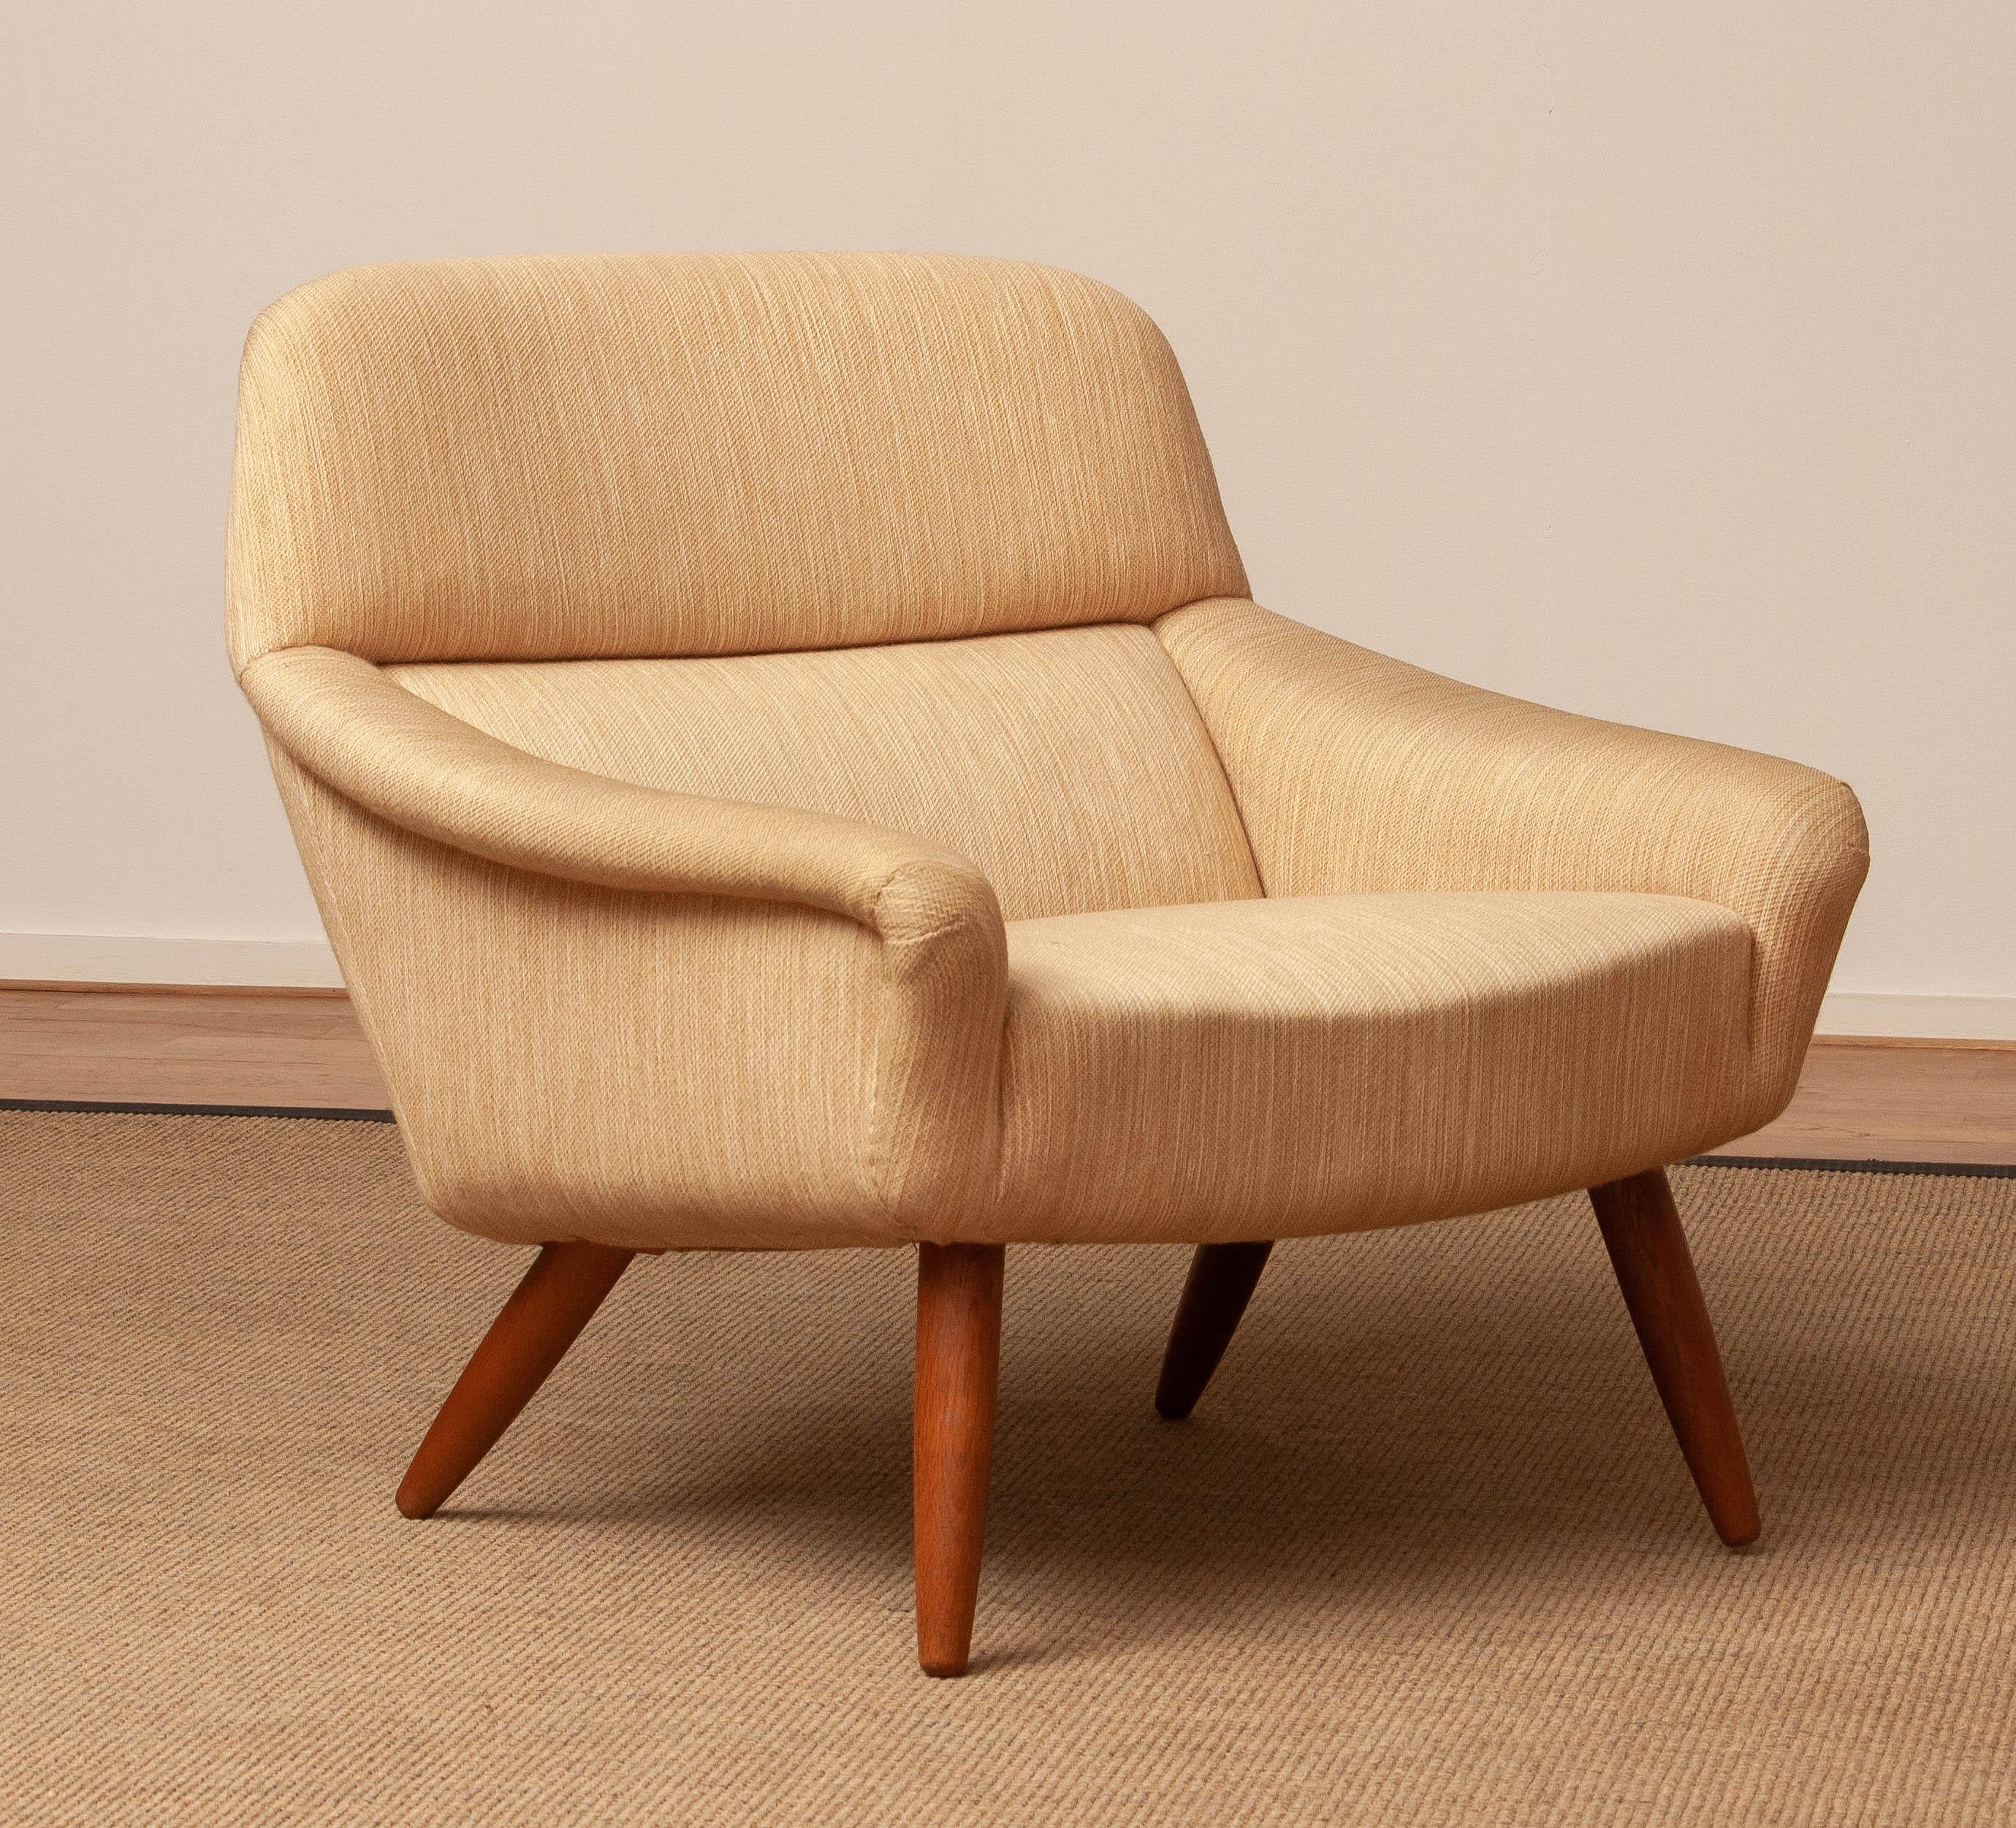 Rare and beautiful solid low back Scandinavian lounge chair with the original natural colored woolen fabric and oak legs from the 1960's designed by Leif Hansen for Mobelfabriken Kronen in Denmark.
This lounge chair is in overal good condition and